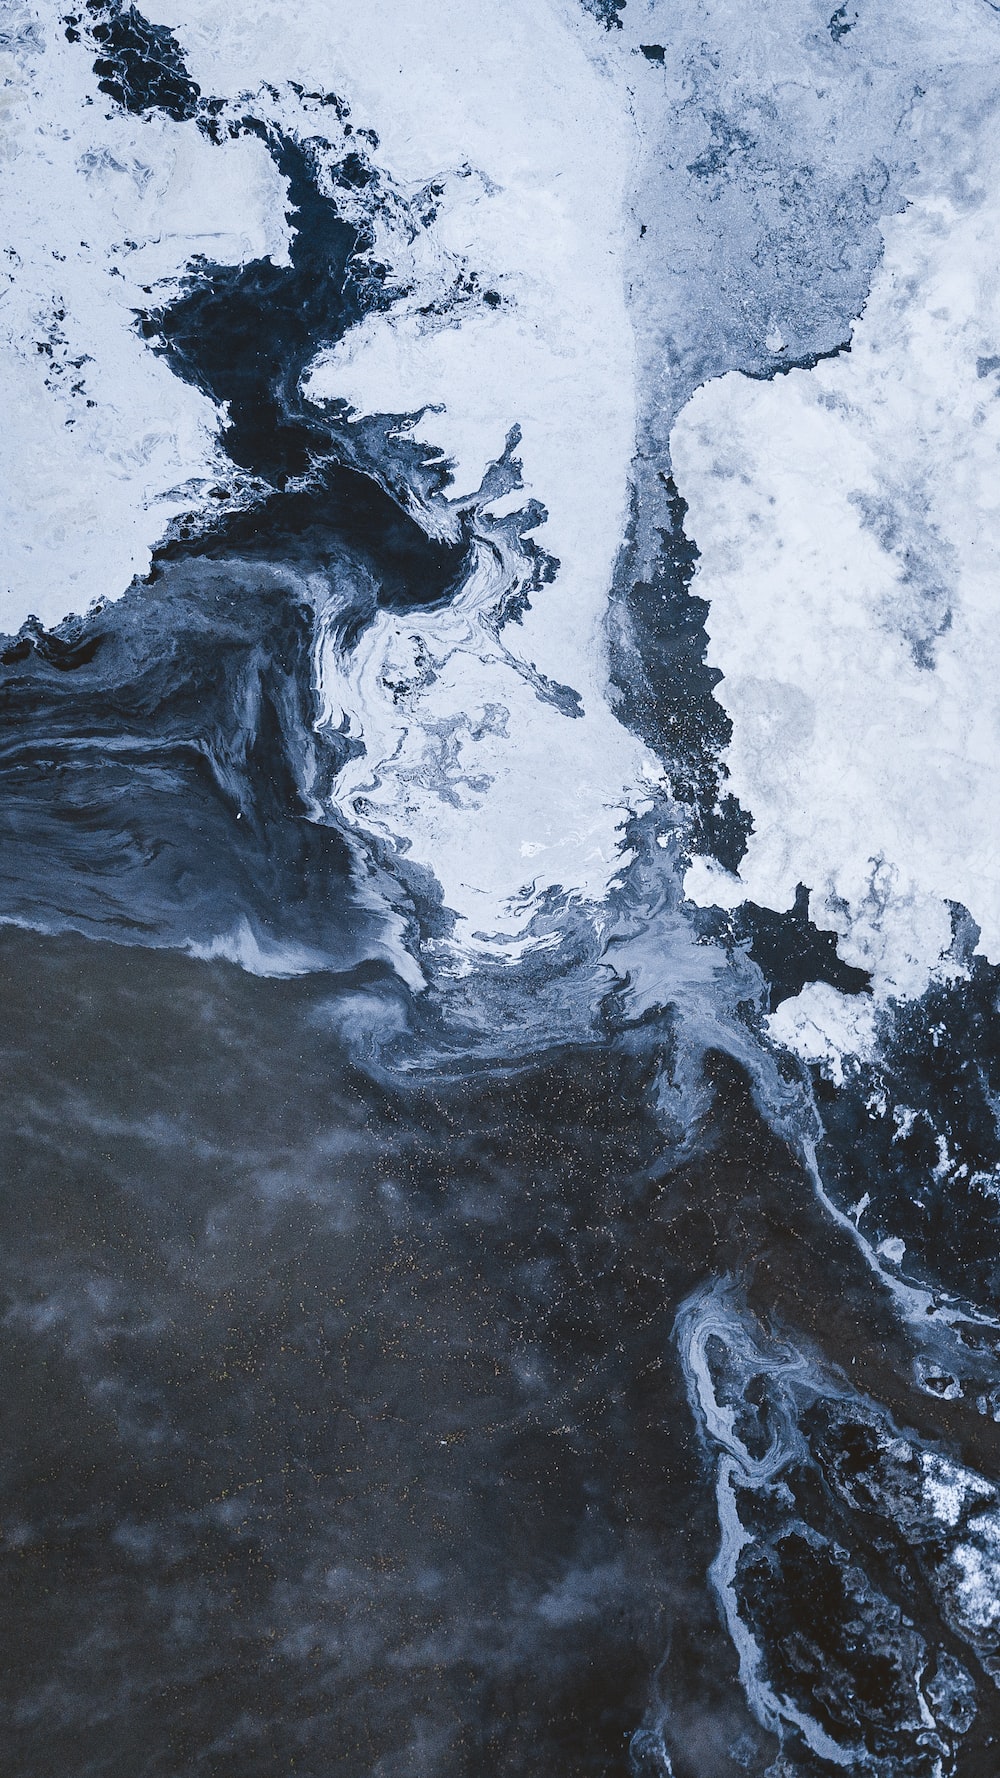 An aerial view of a body of water with ice and snow. - Marble